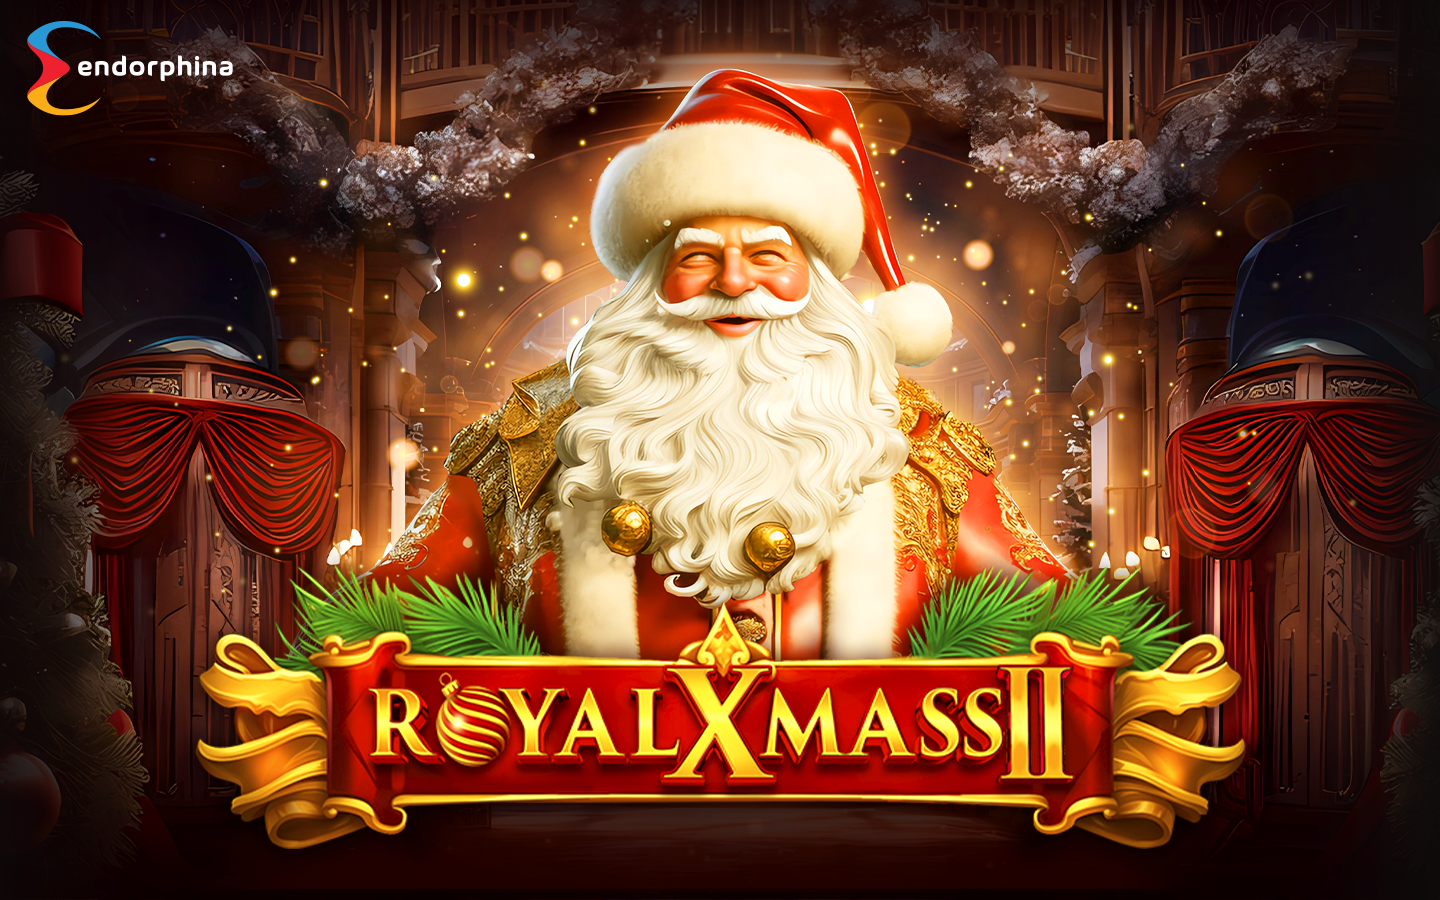 CHRISTMAS-THEMED SLOT | Royal Xmass 2 is out now!